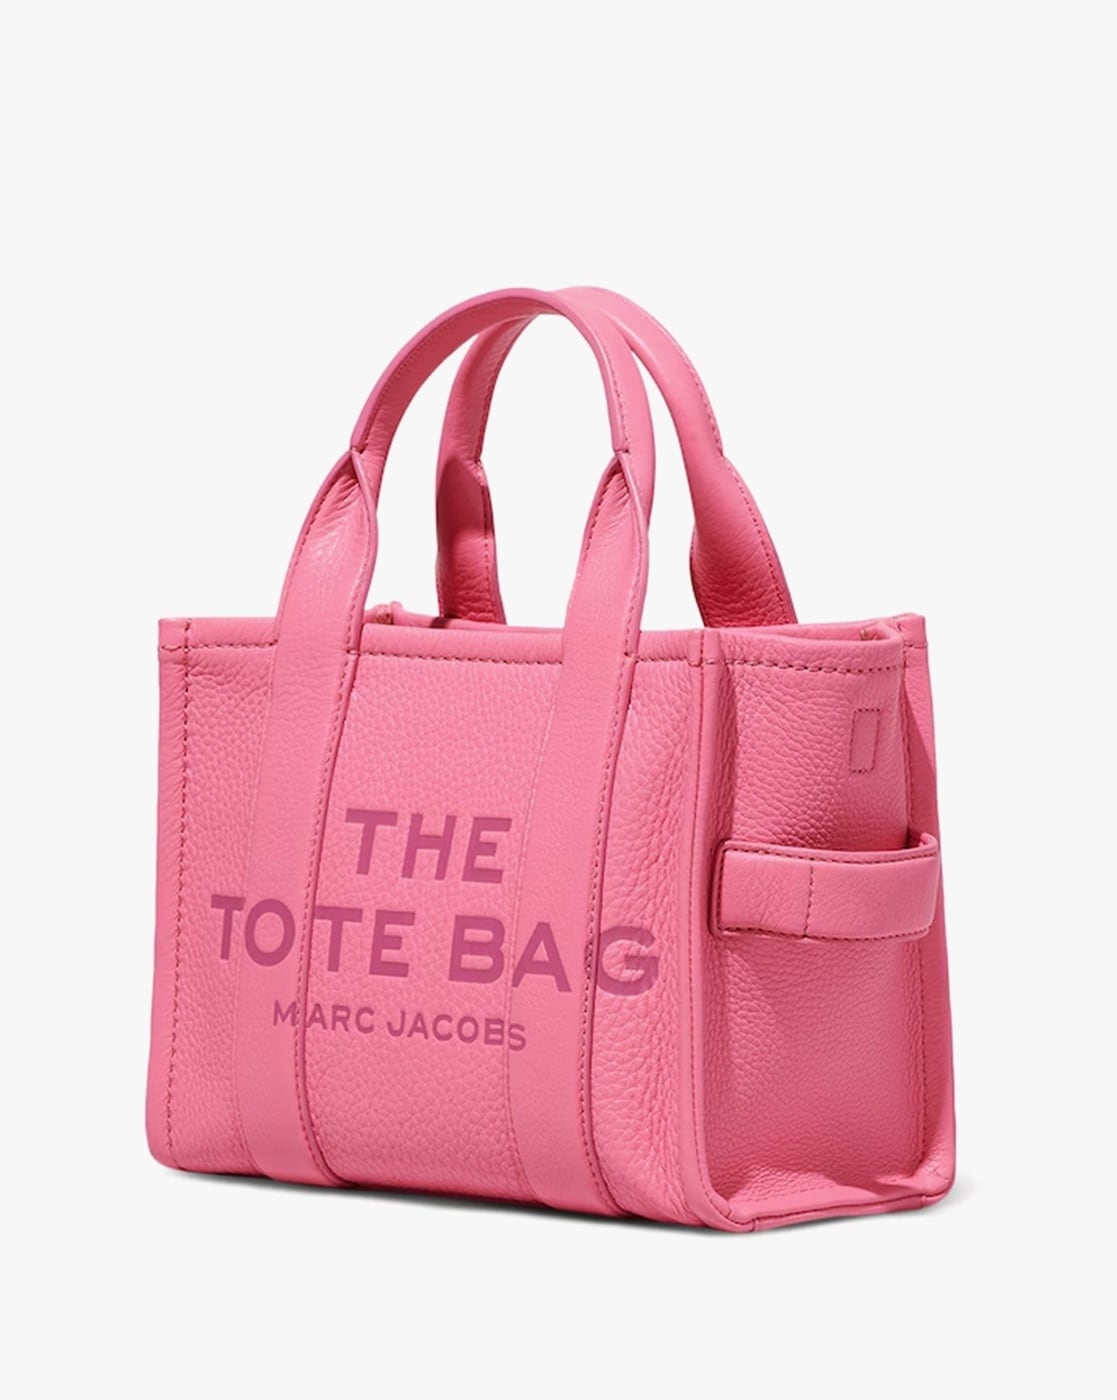 marc jacobs cloth tote